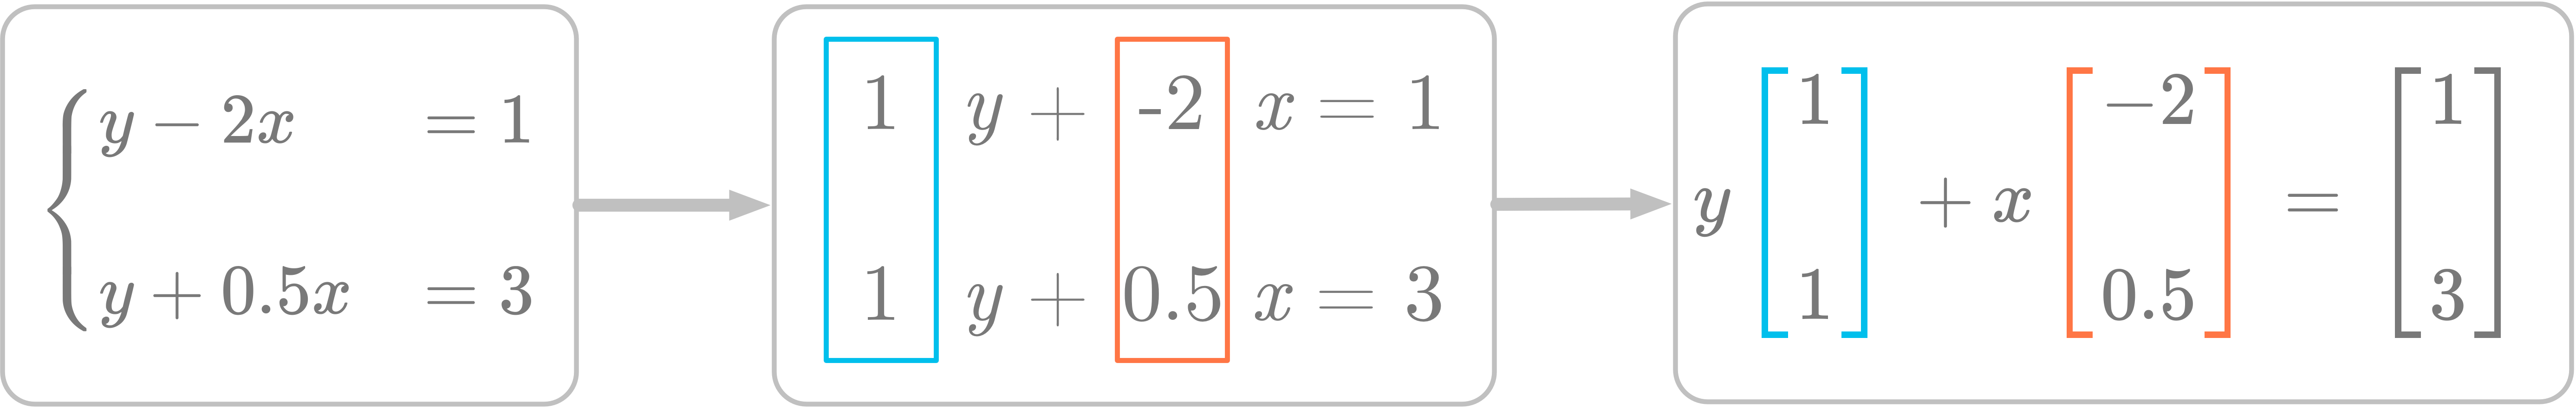 Figure 3: Considering the system of equations as column vectors scaled by the variables $x$ and $y$.